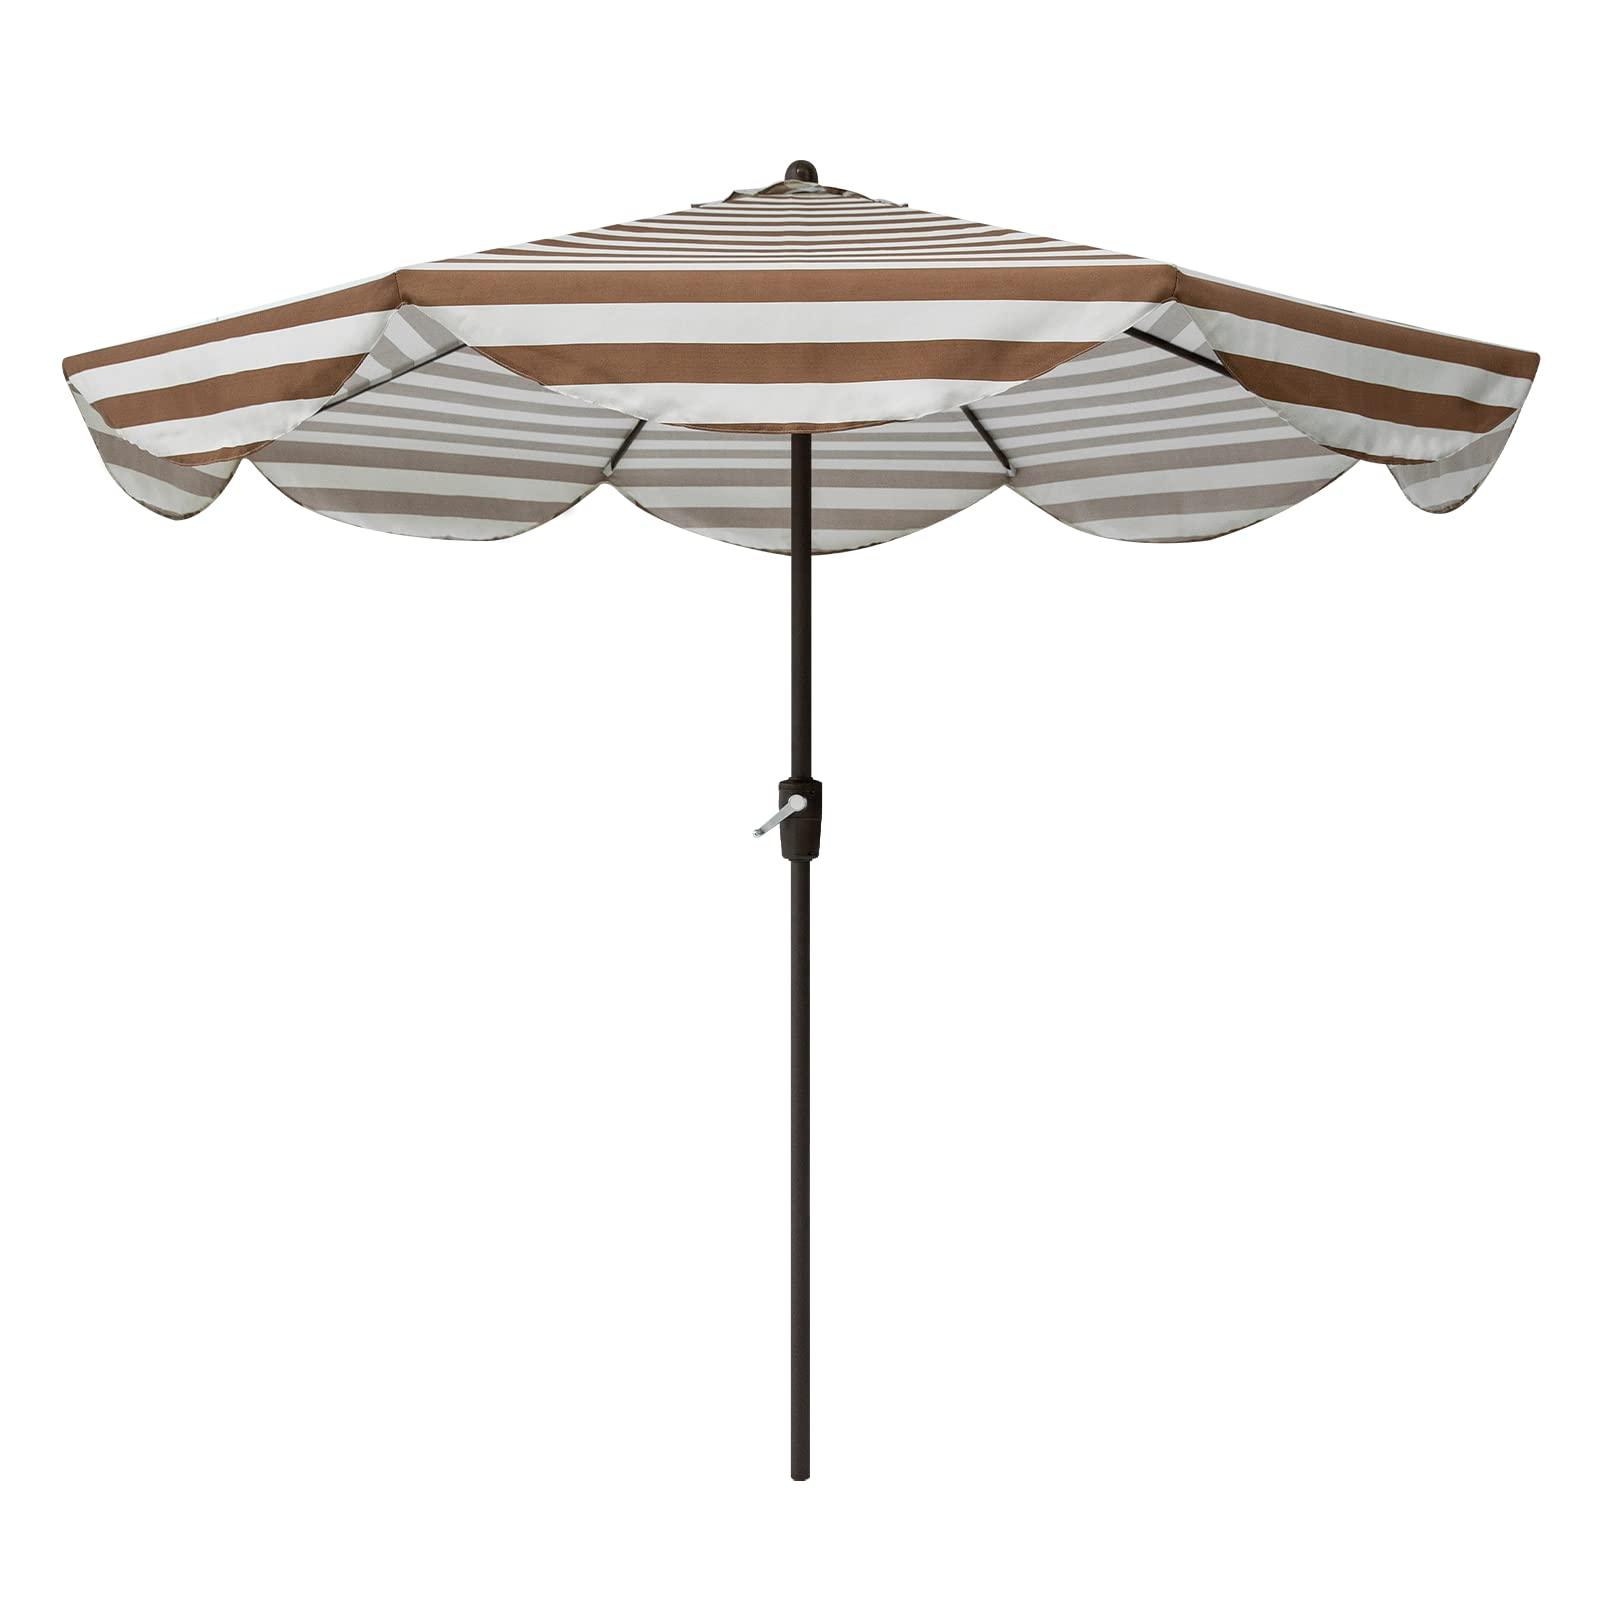 Tempera 9ft Auto Tilt Scalloped Patio Umbrellas Outdoor Table Umbrellas with Fade Resistant Canopy, 8 Sturdy Rids, Luxurious Vintage Umbrellas for Lawn, Pool, Deck, Balcony - CookCave